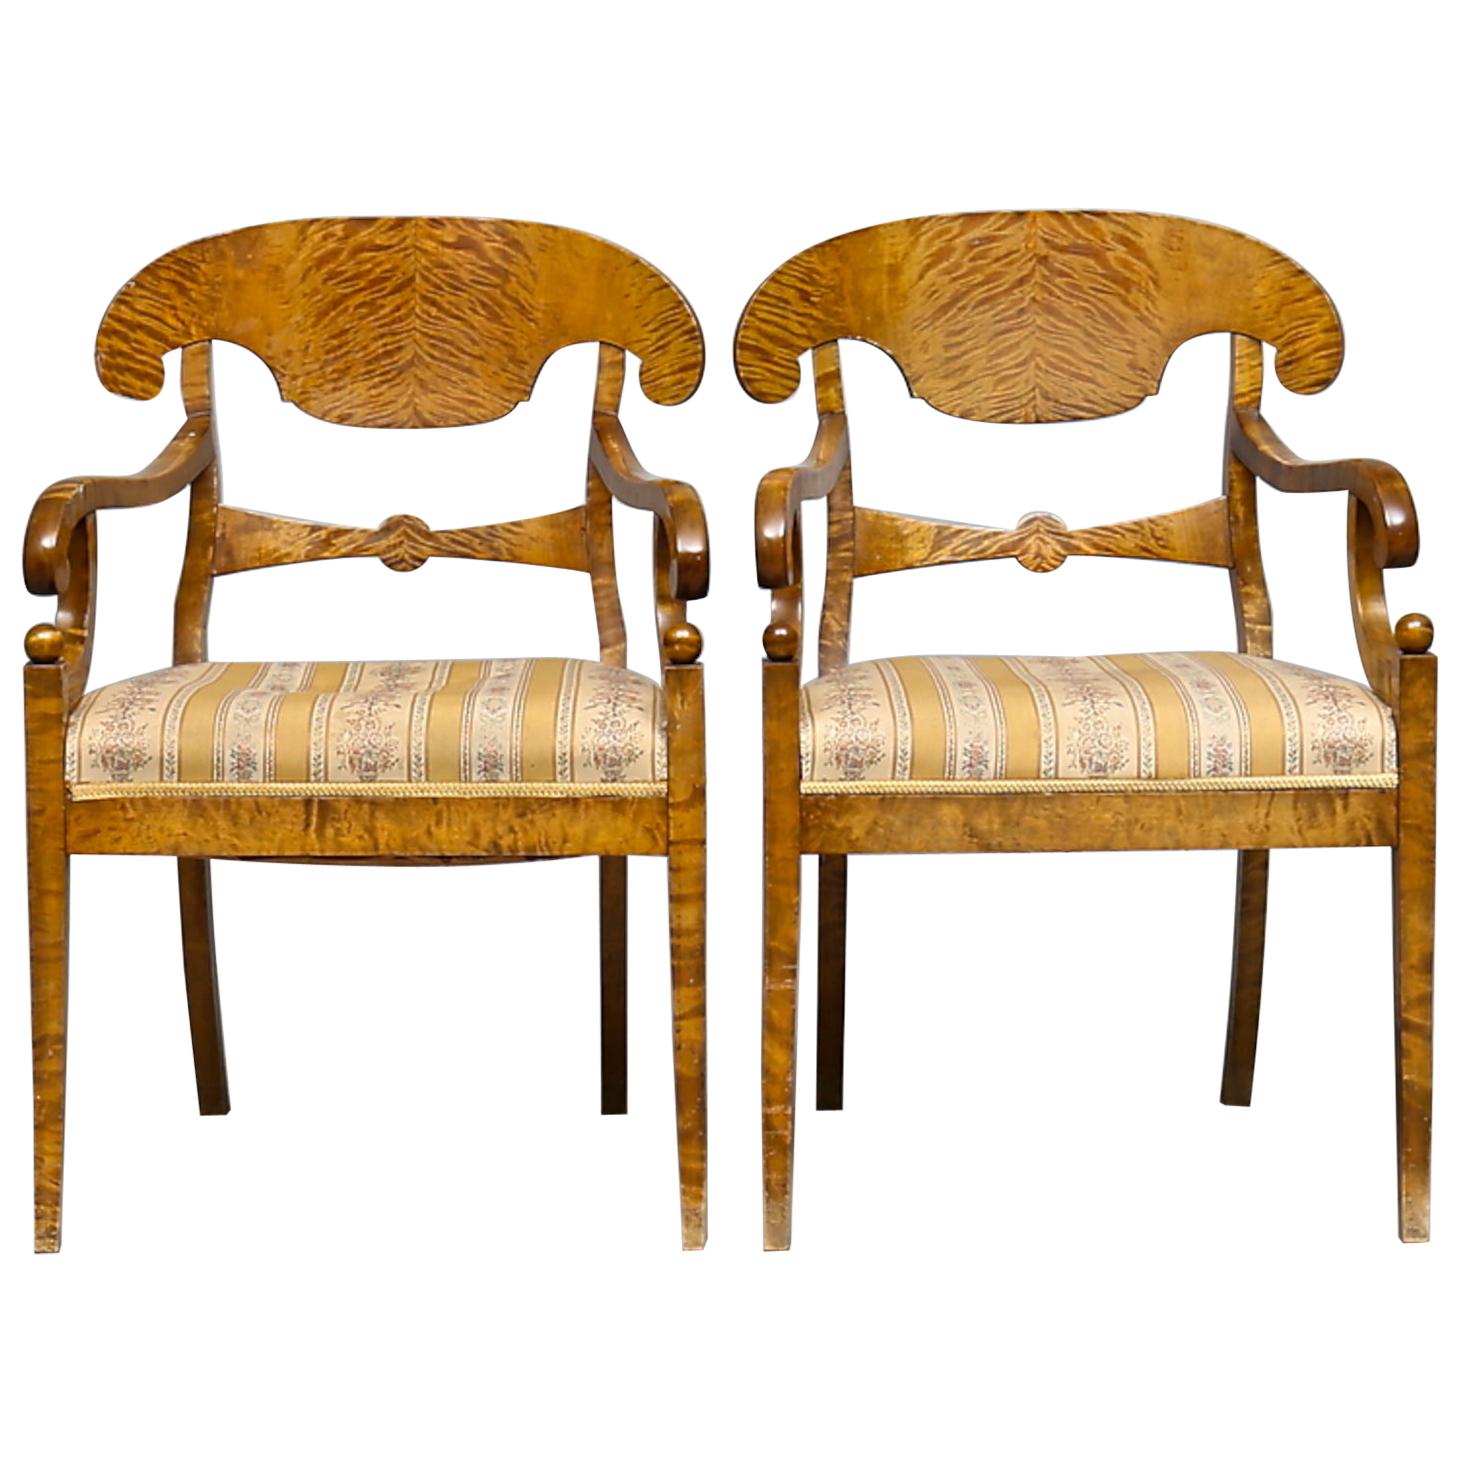 Biedermeier Carver Chairs Late 1800s Swedish Antique Quilted Golden Birch